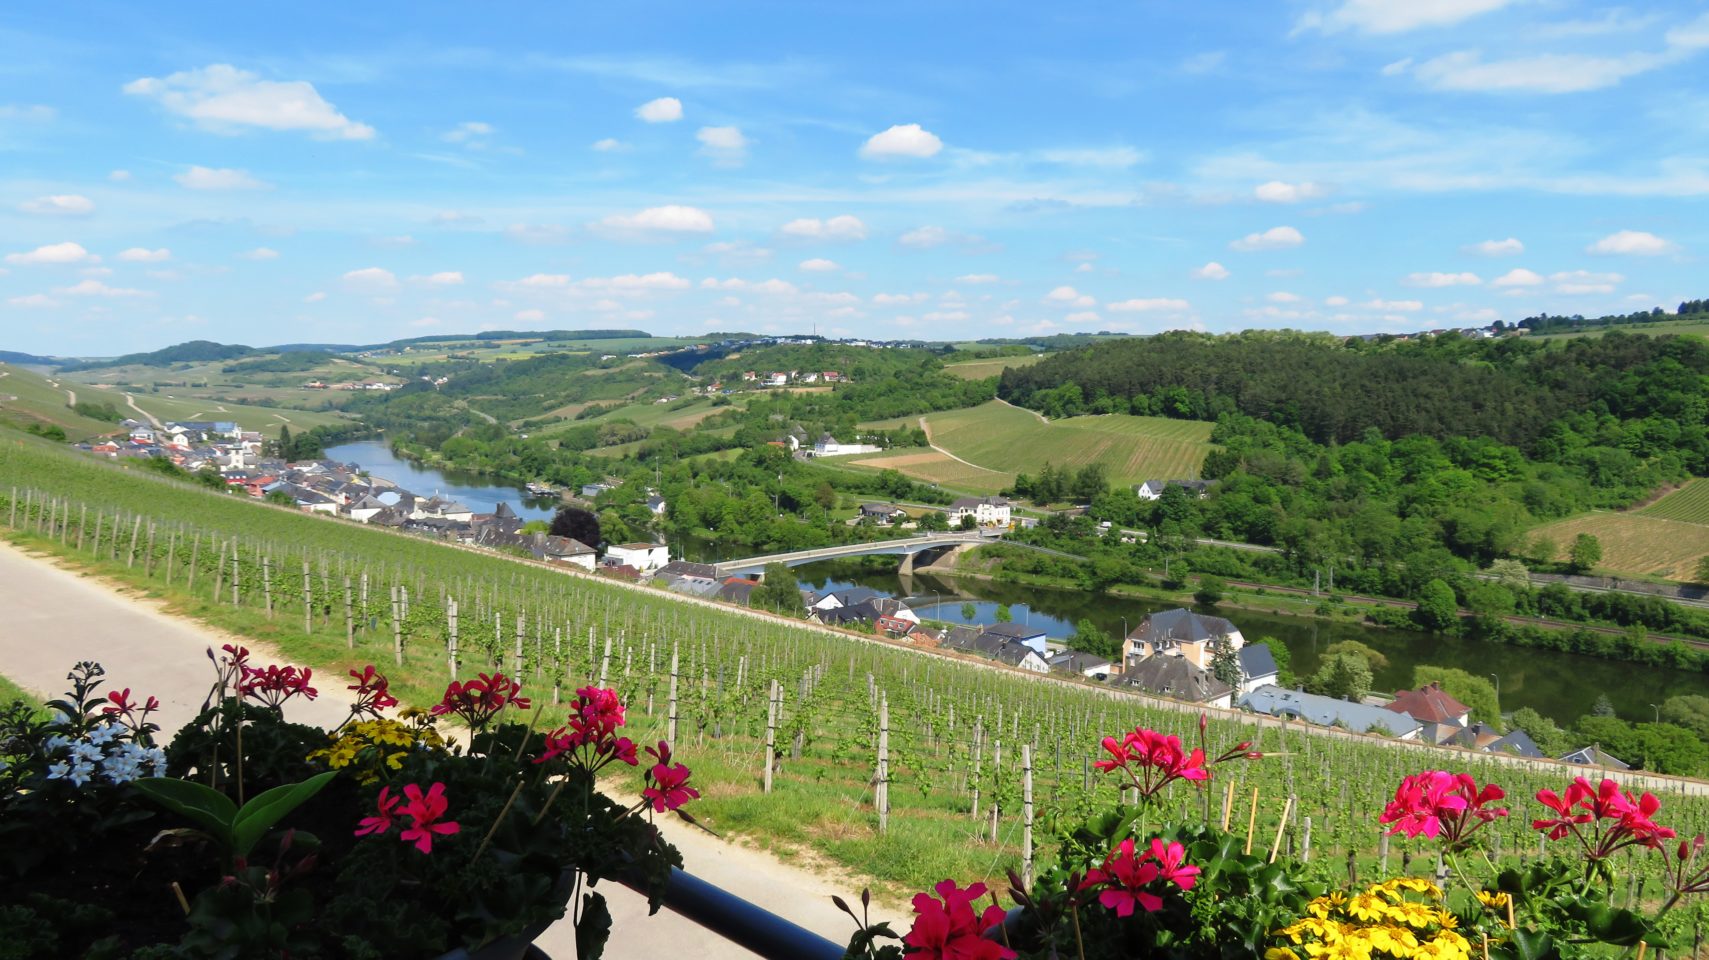 Pundel vineyard along the Moselle River in <em><strong>Luxembourg</strong></em>